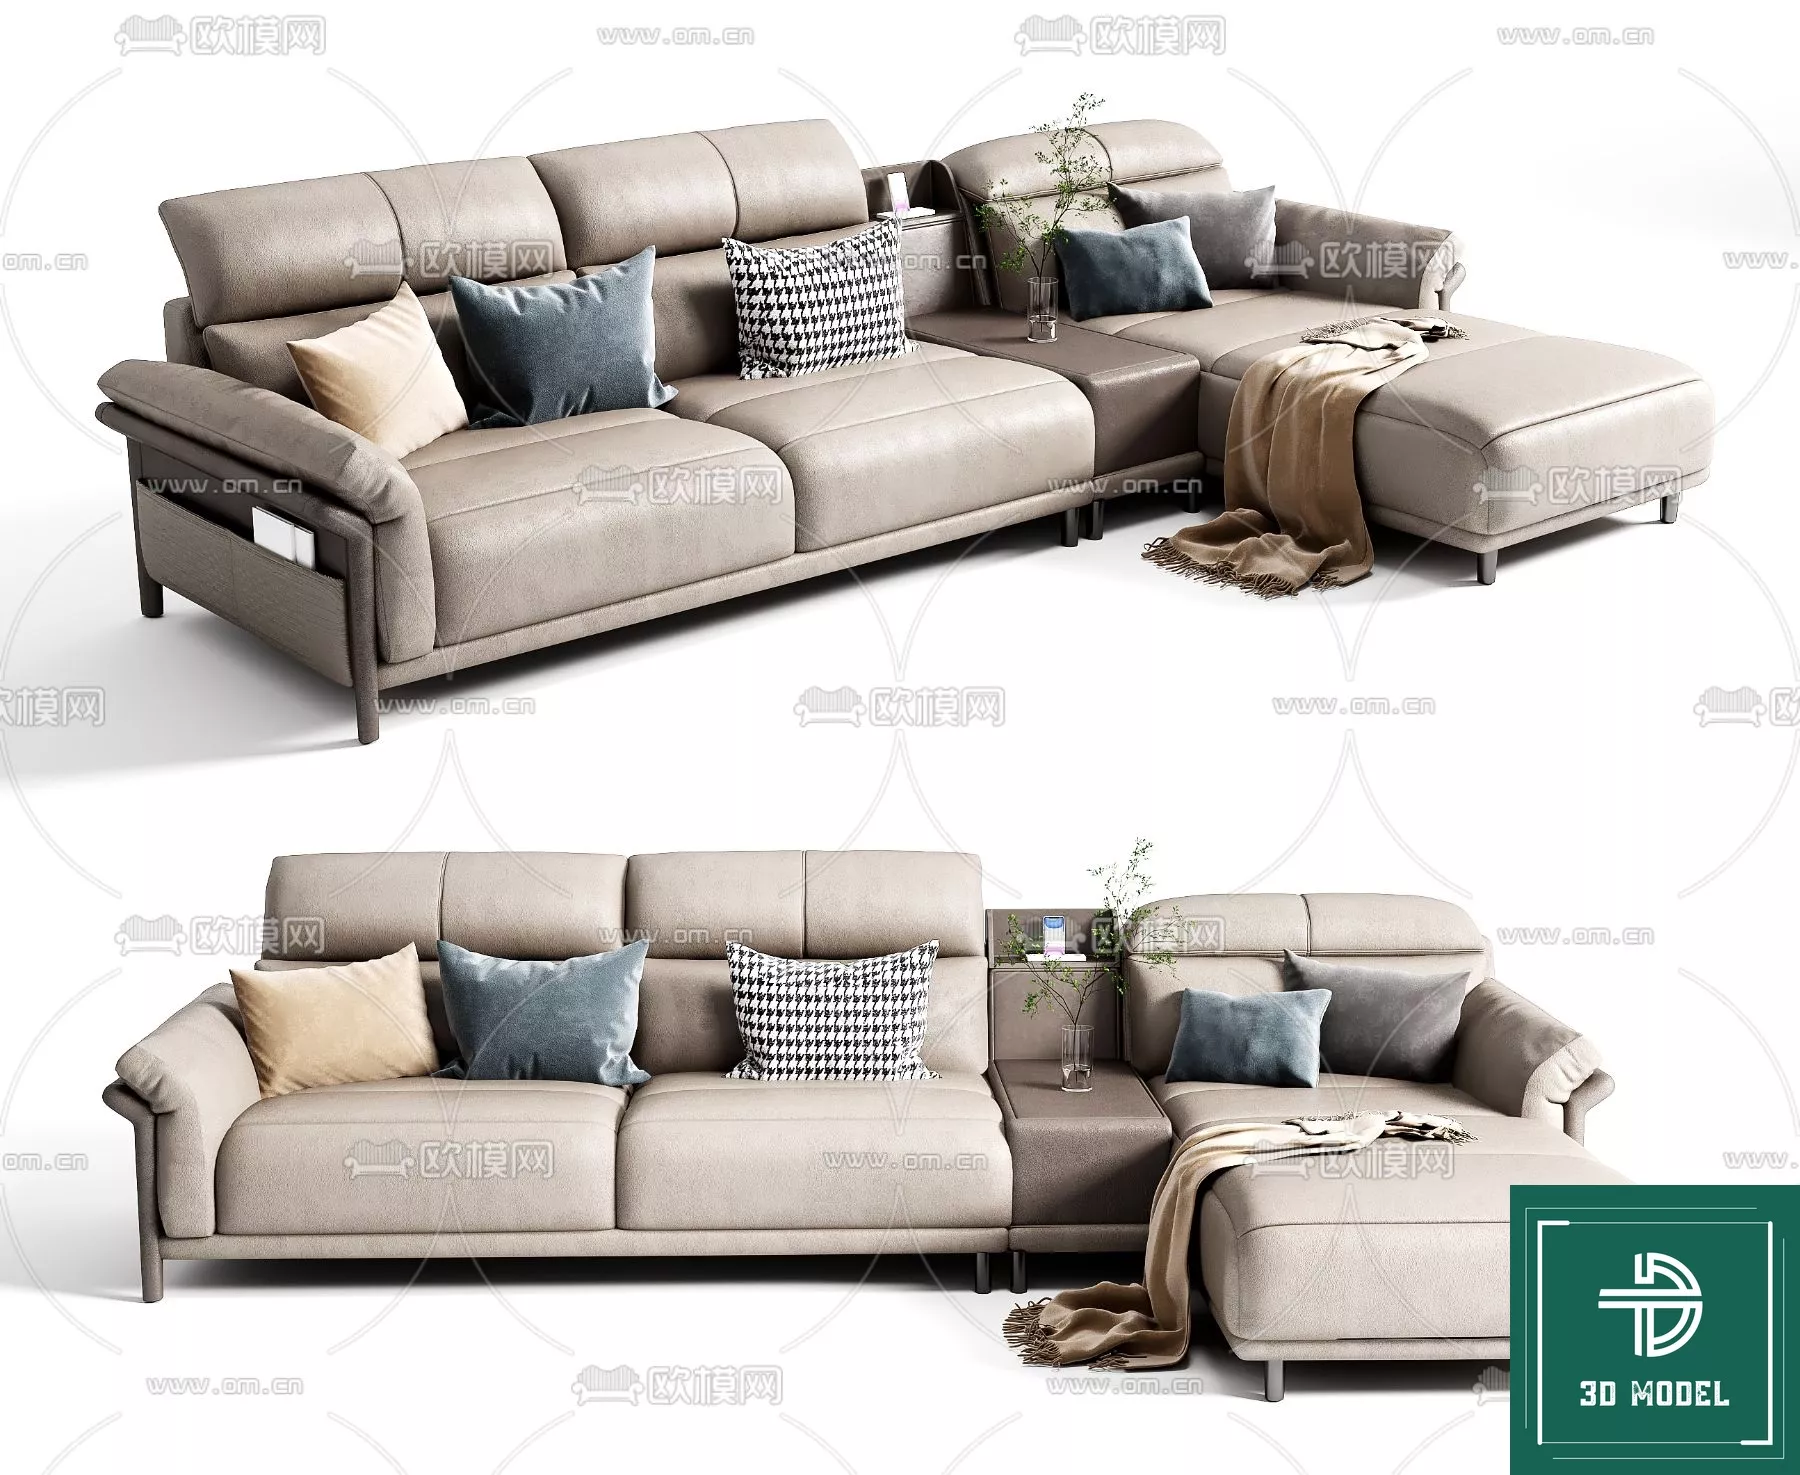 MODERN SOFA - SKETCHUP 3D MODEL - VRAY OR ENSCAPE - ID13283